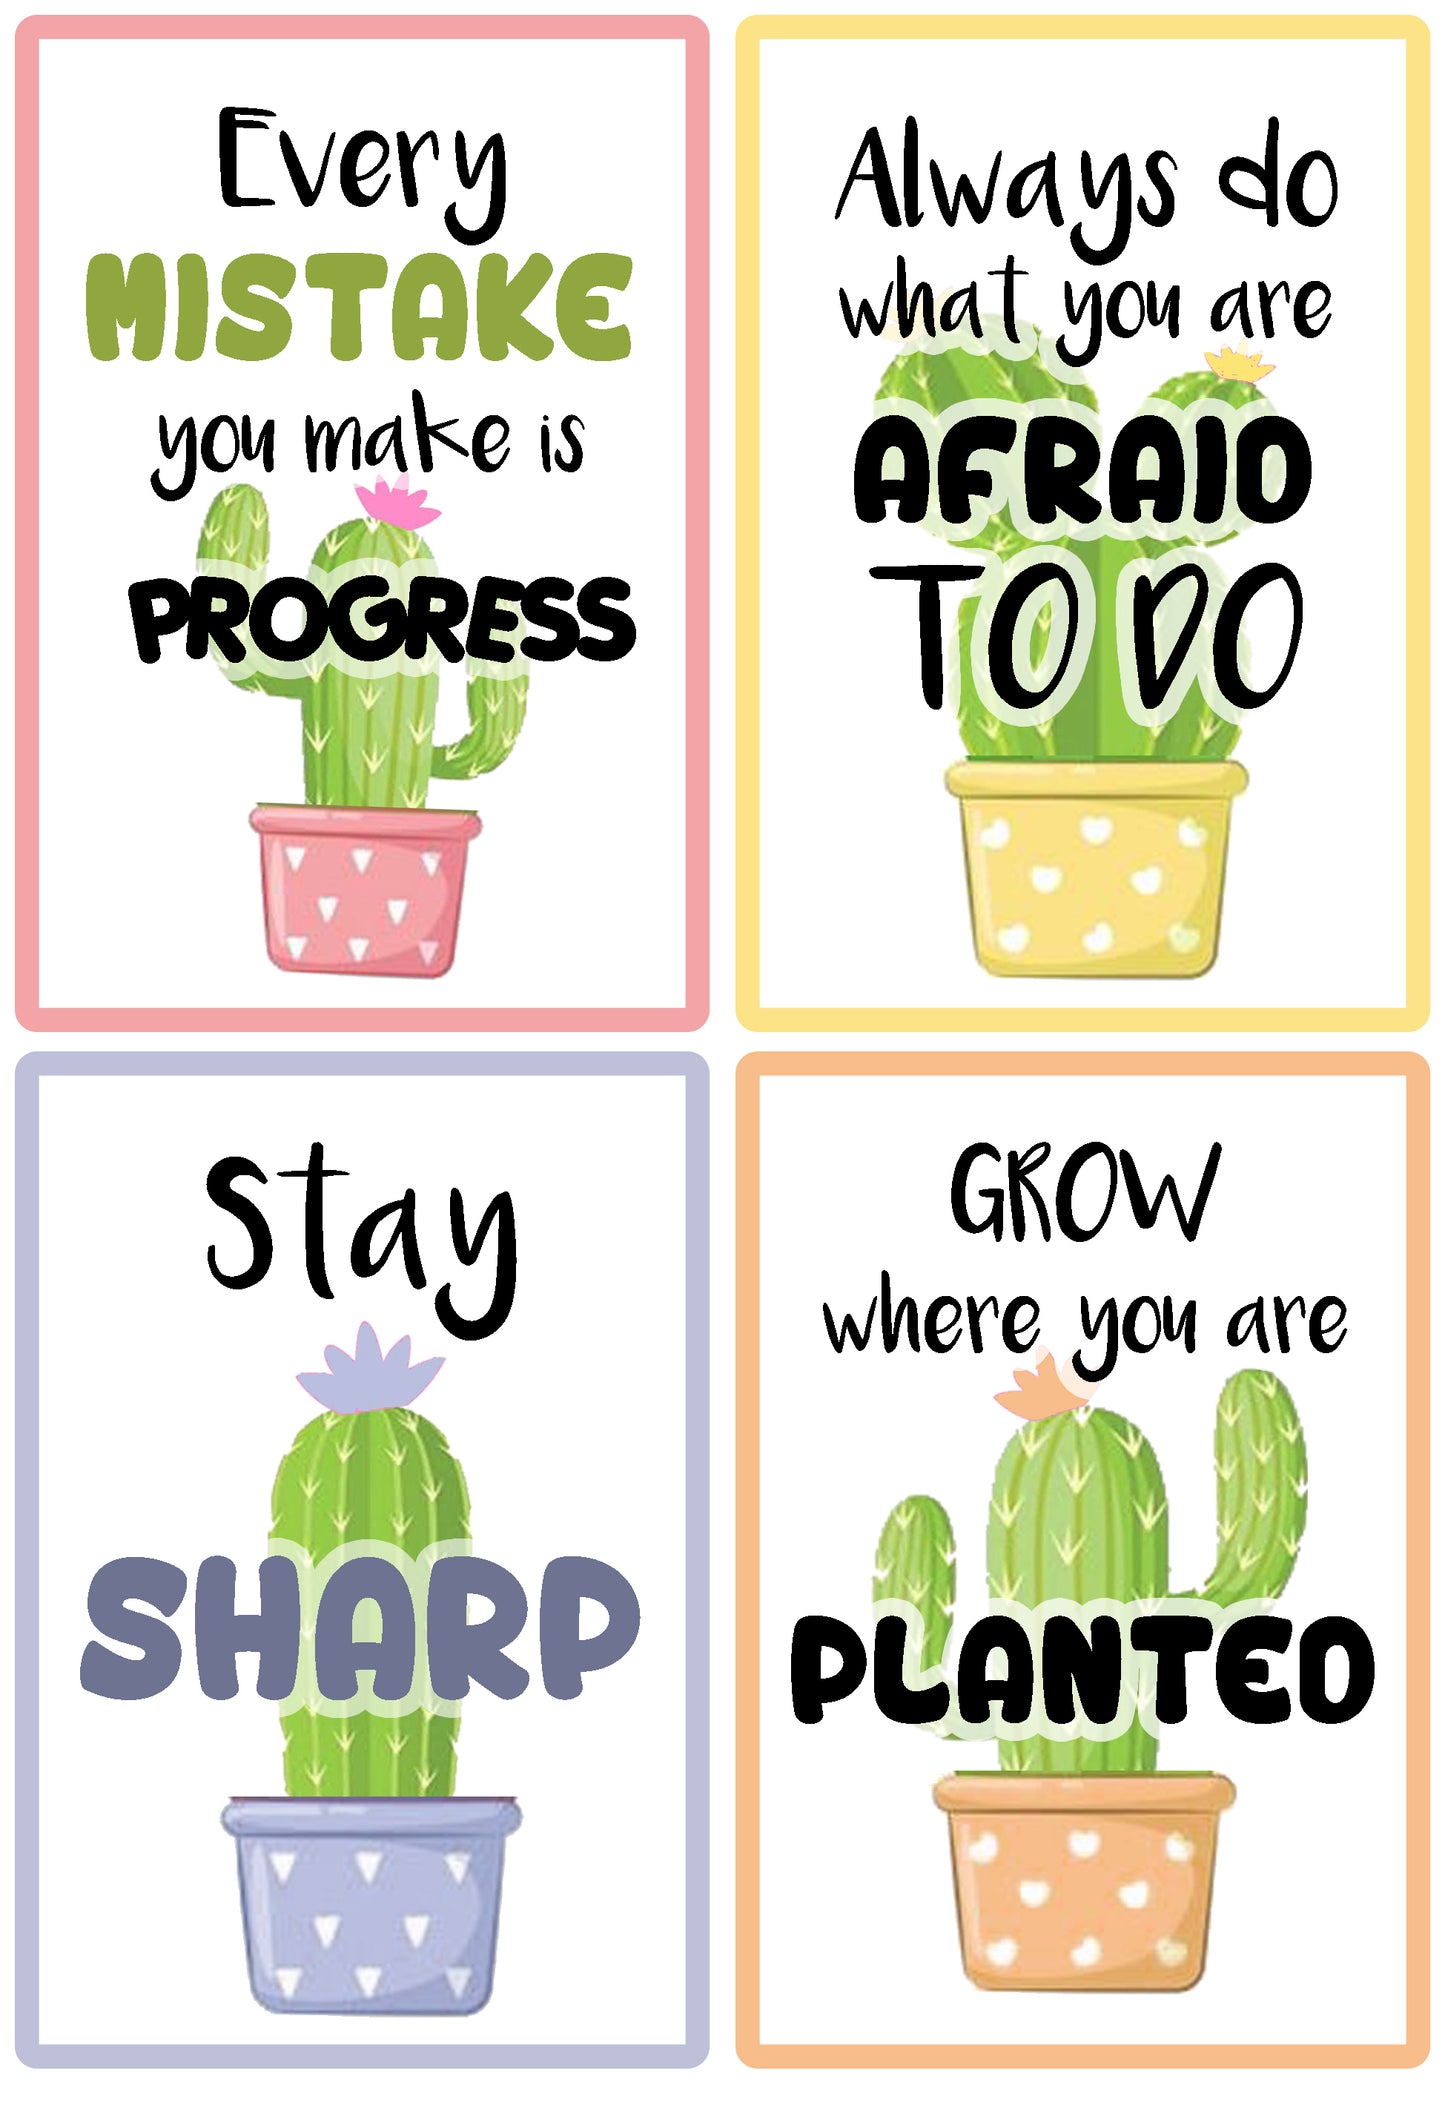 Cactus Welcome Board Set